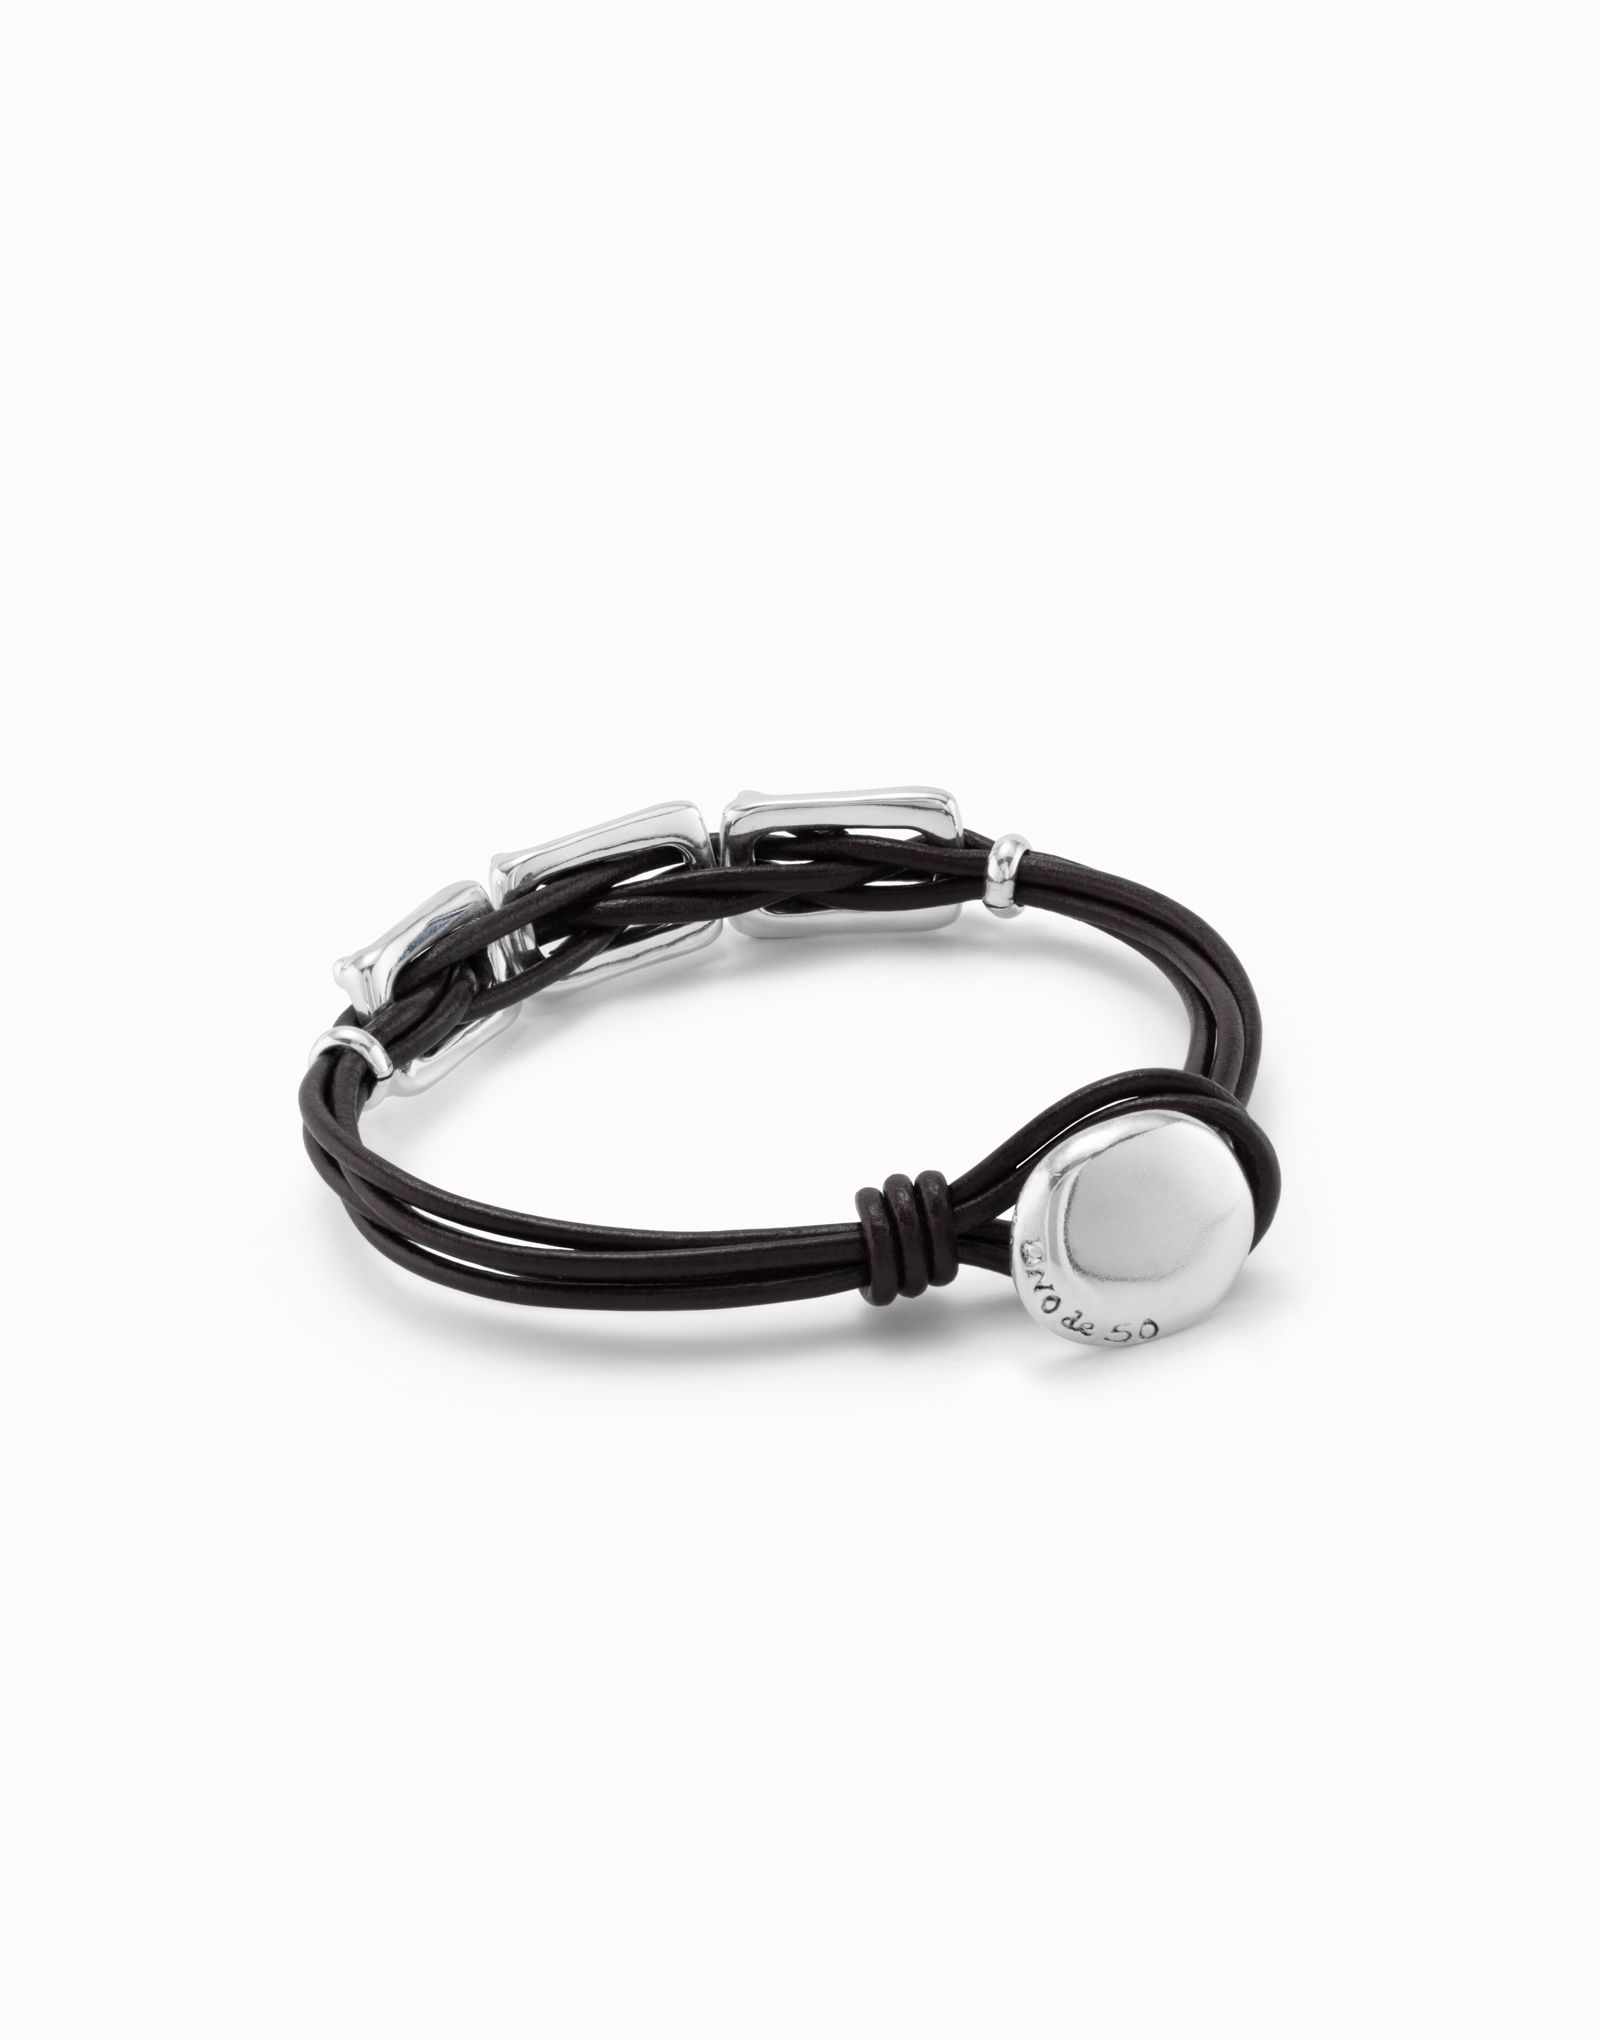 Bracciale in cuoio con maglie centrali placcate argento Sterling e chiusura a bottone, Argent, large image number null